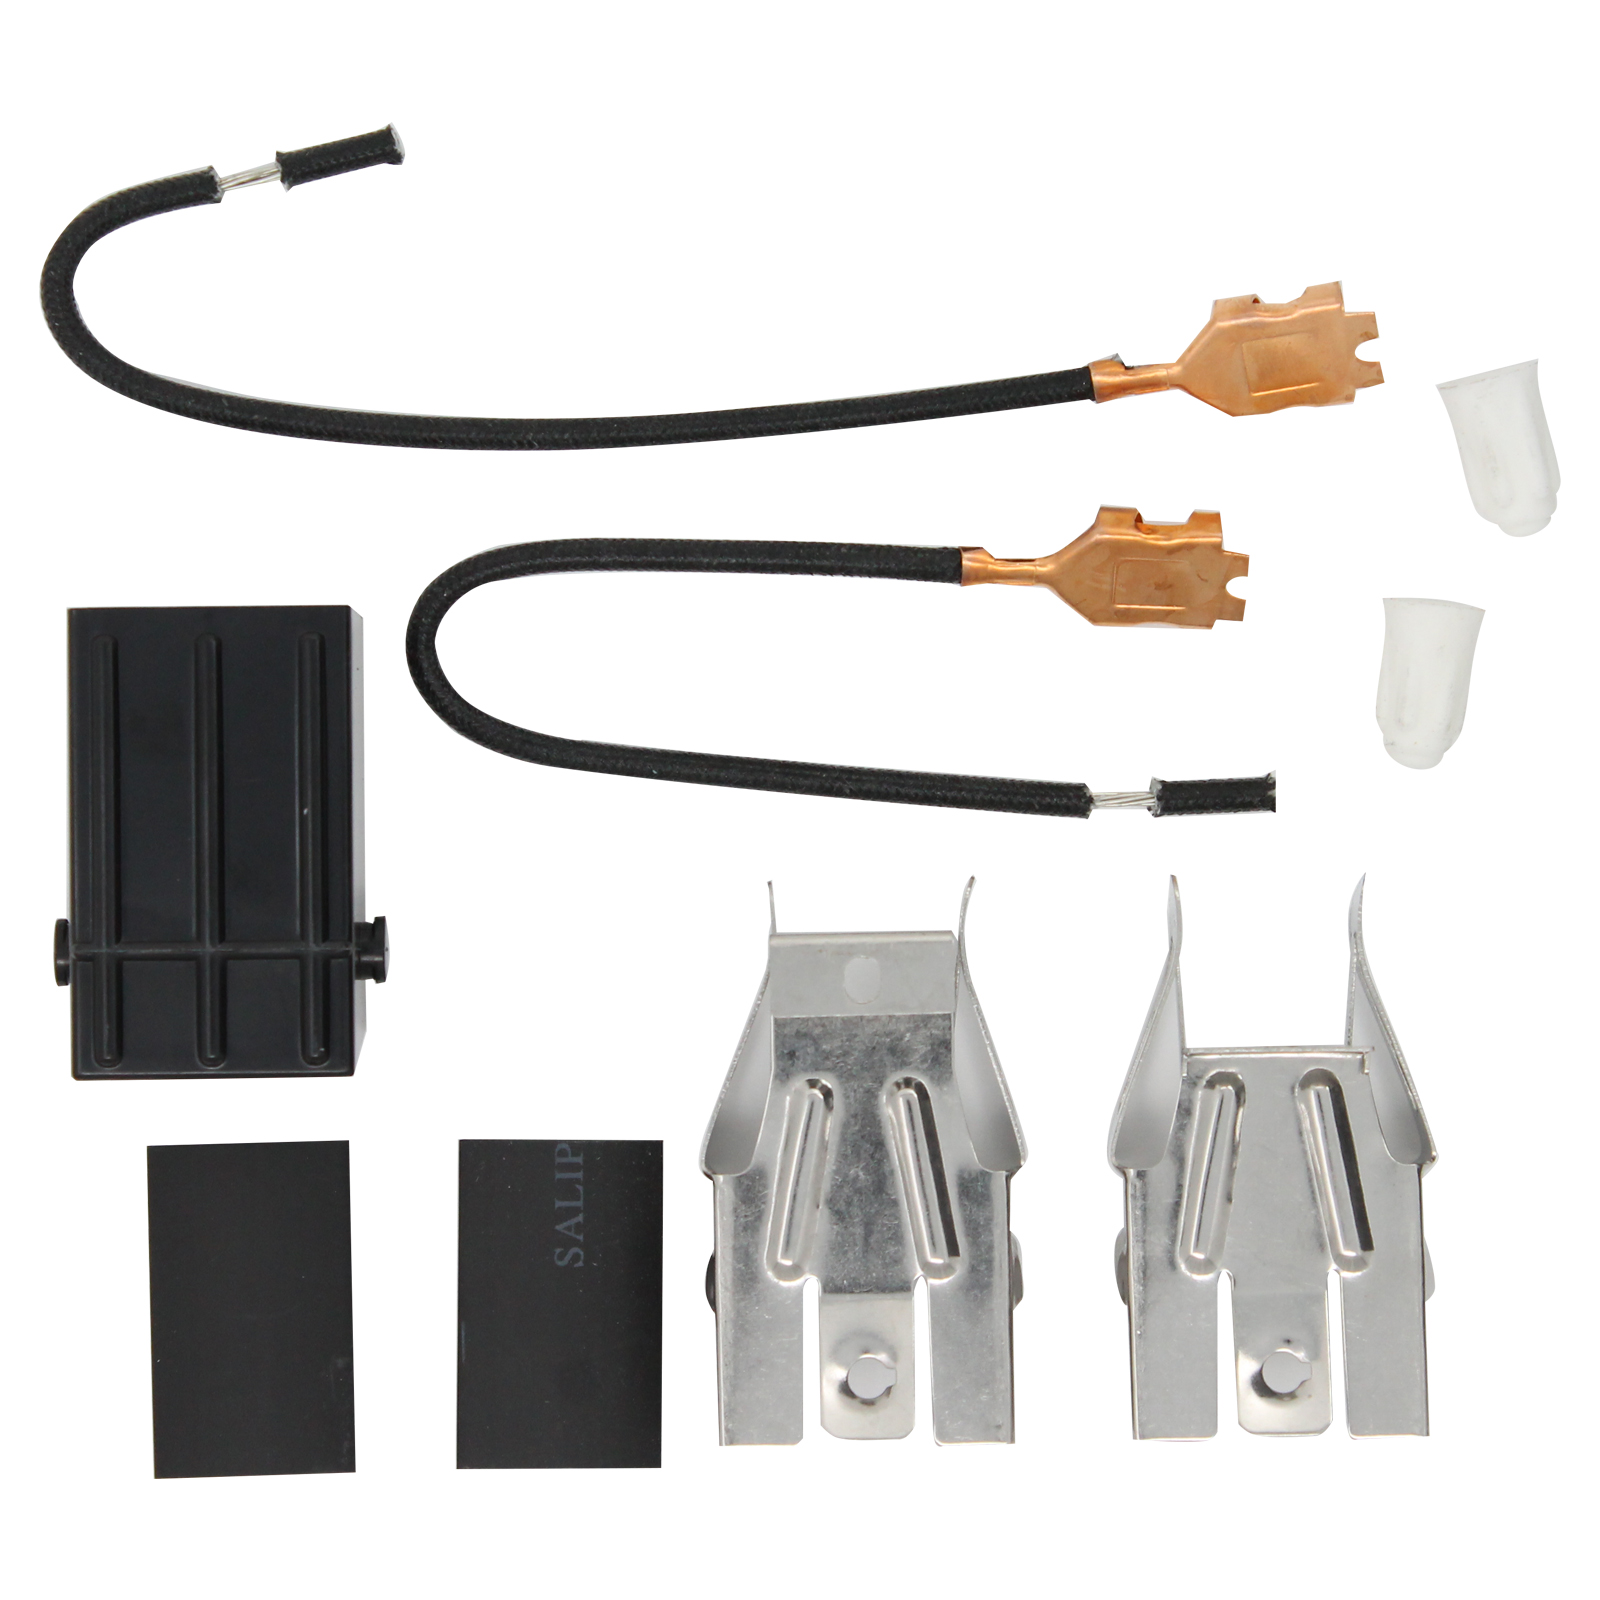 330031 Top Burner Receptacle Kit Replacement for Amana ARS635 (P1130617N) Range/Cooktop/Oven - Compatible with 330031 Range Burner Receptacle Kit - UpStart Components Brand - image 2 of 4